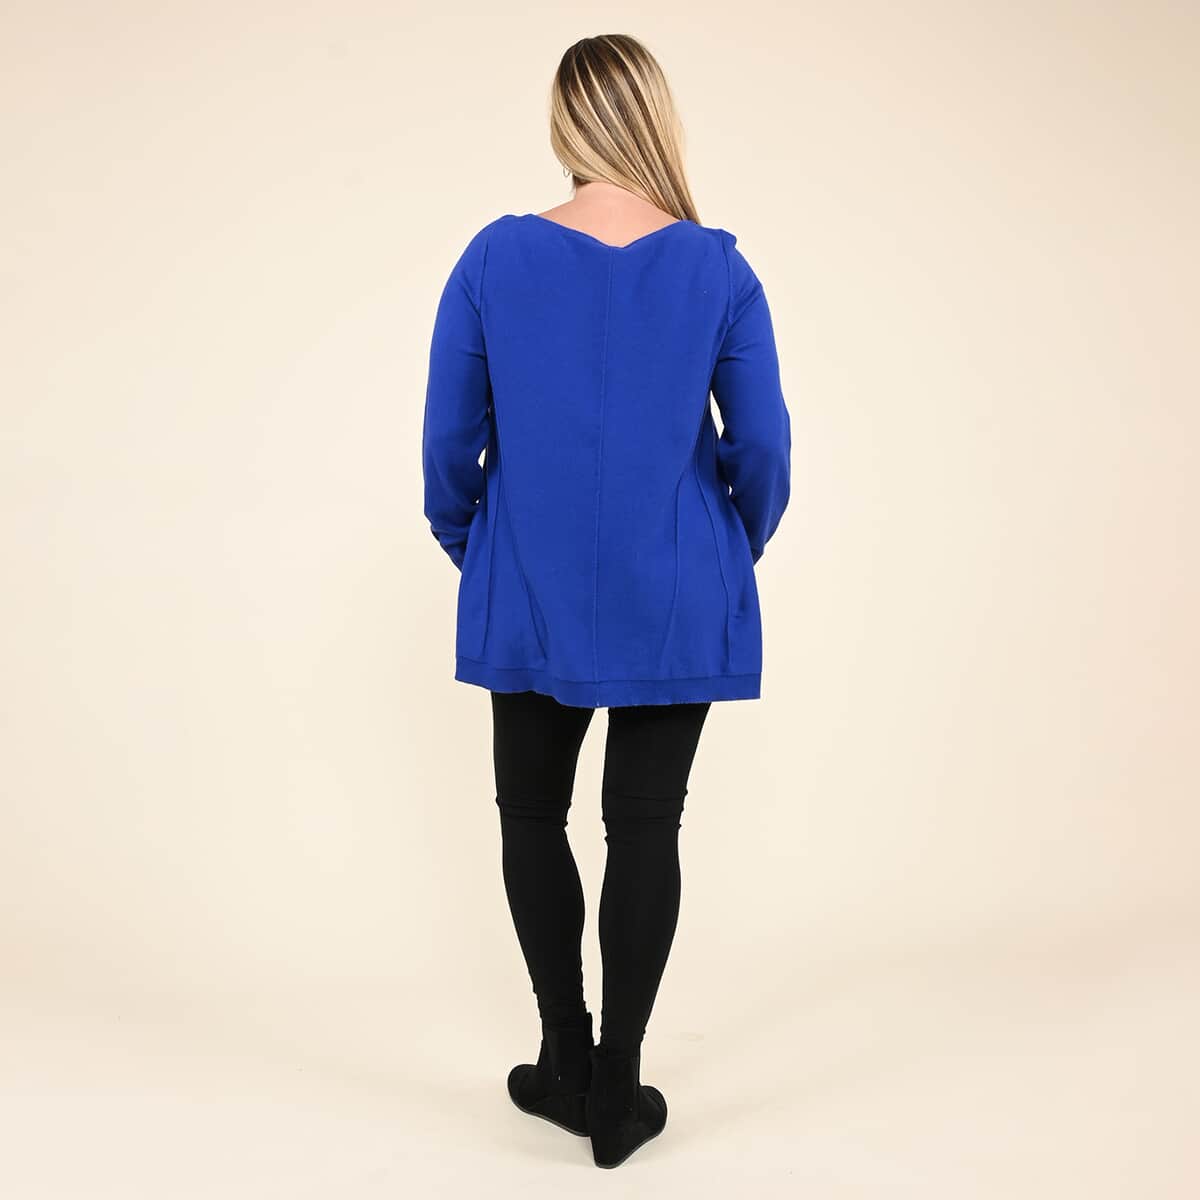 Tamsy Blue Long Sleeves with Ribbed Cuffs, Crew Neck Tunic Sweater - XL image number 1